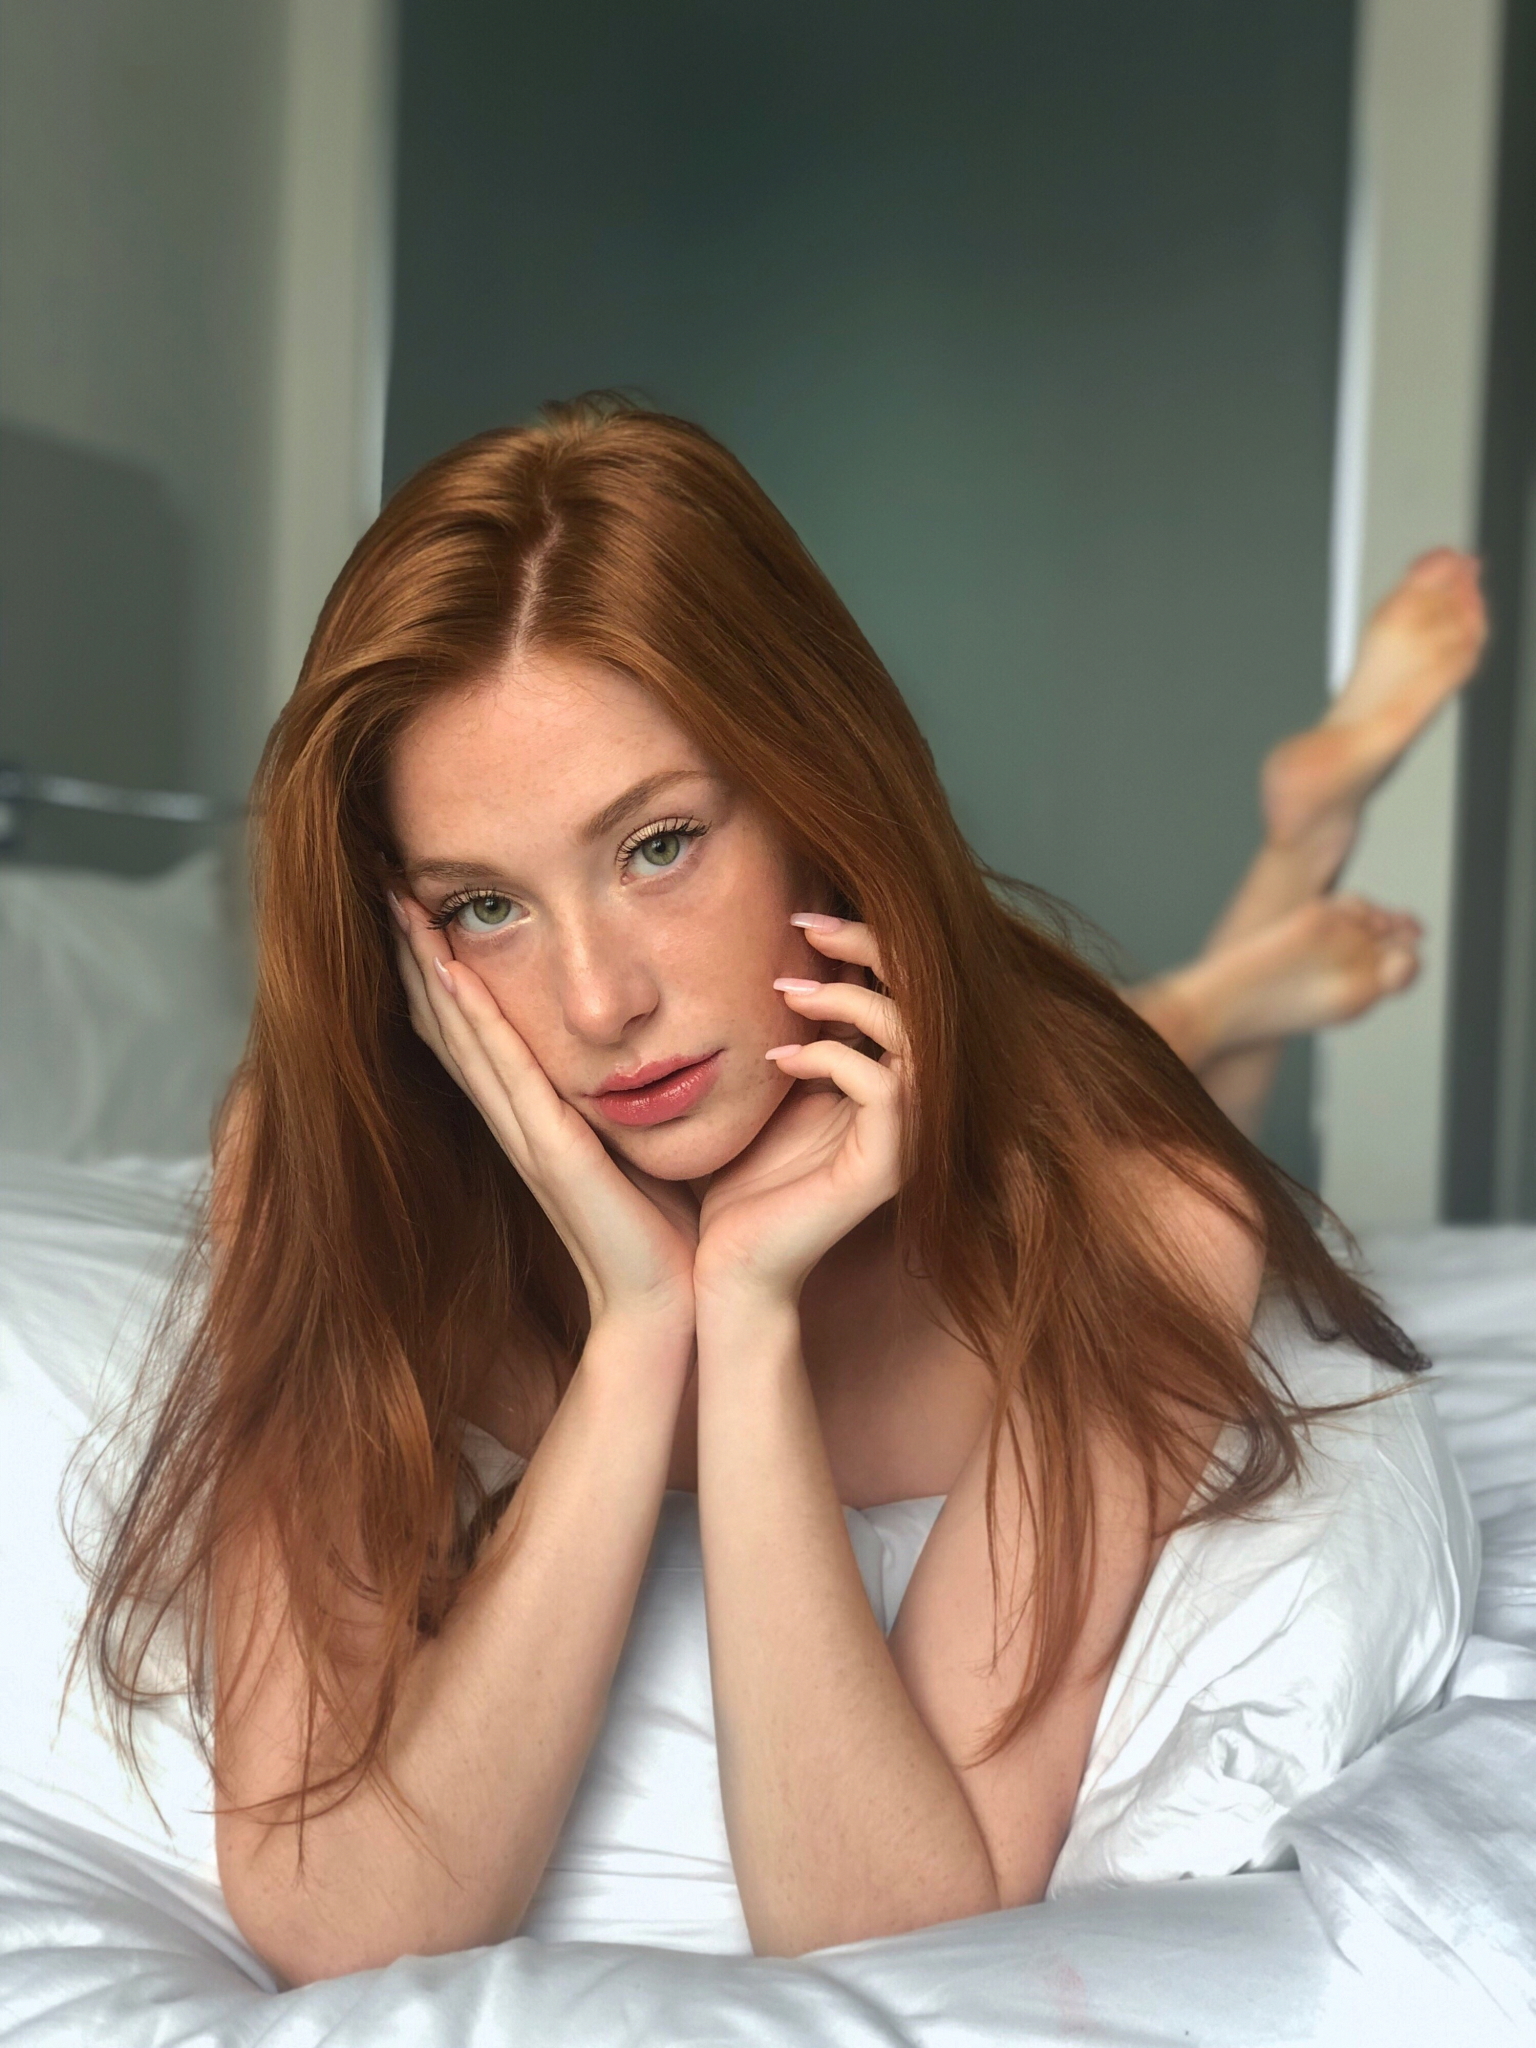 People 1536x2048 Madeline Ford women redhead model long hair freckles looking at viewer parted lips touching face lying on front barefoot in bed depth of field bedroom portrait display indoors women indoors